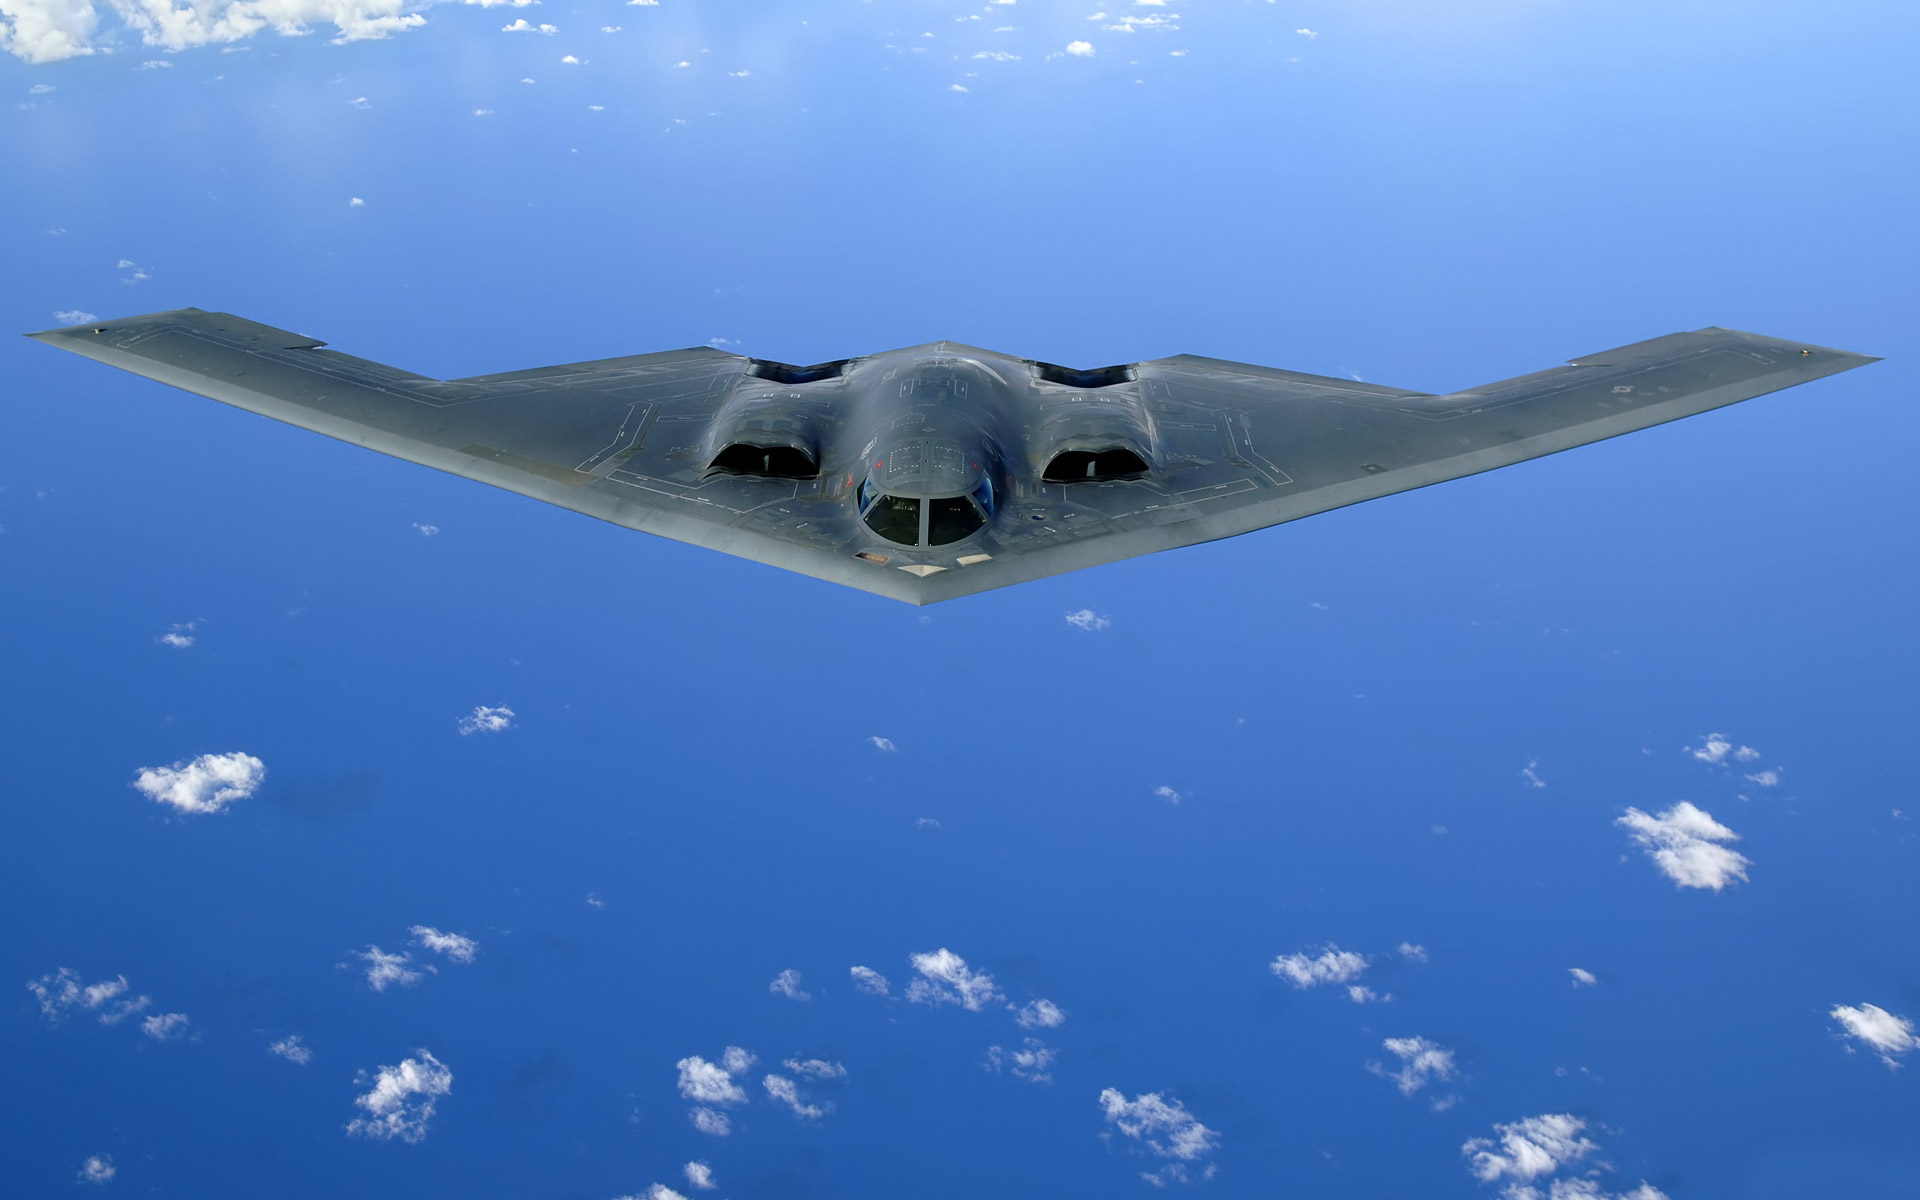 Stealth Military Jet Hd Wallpapers in Aircraft Imagescicom